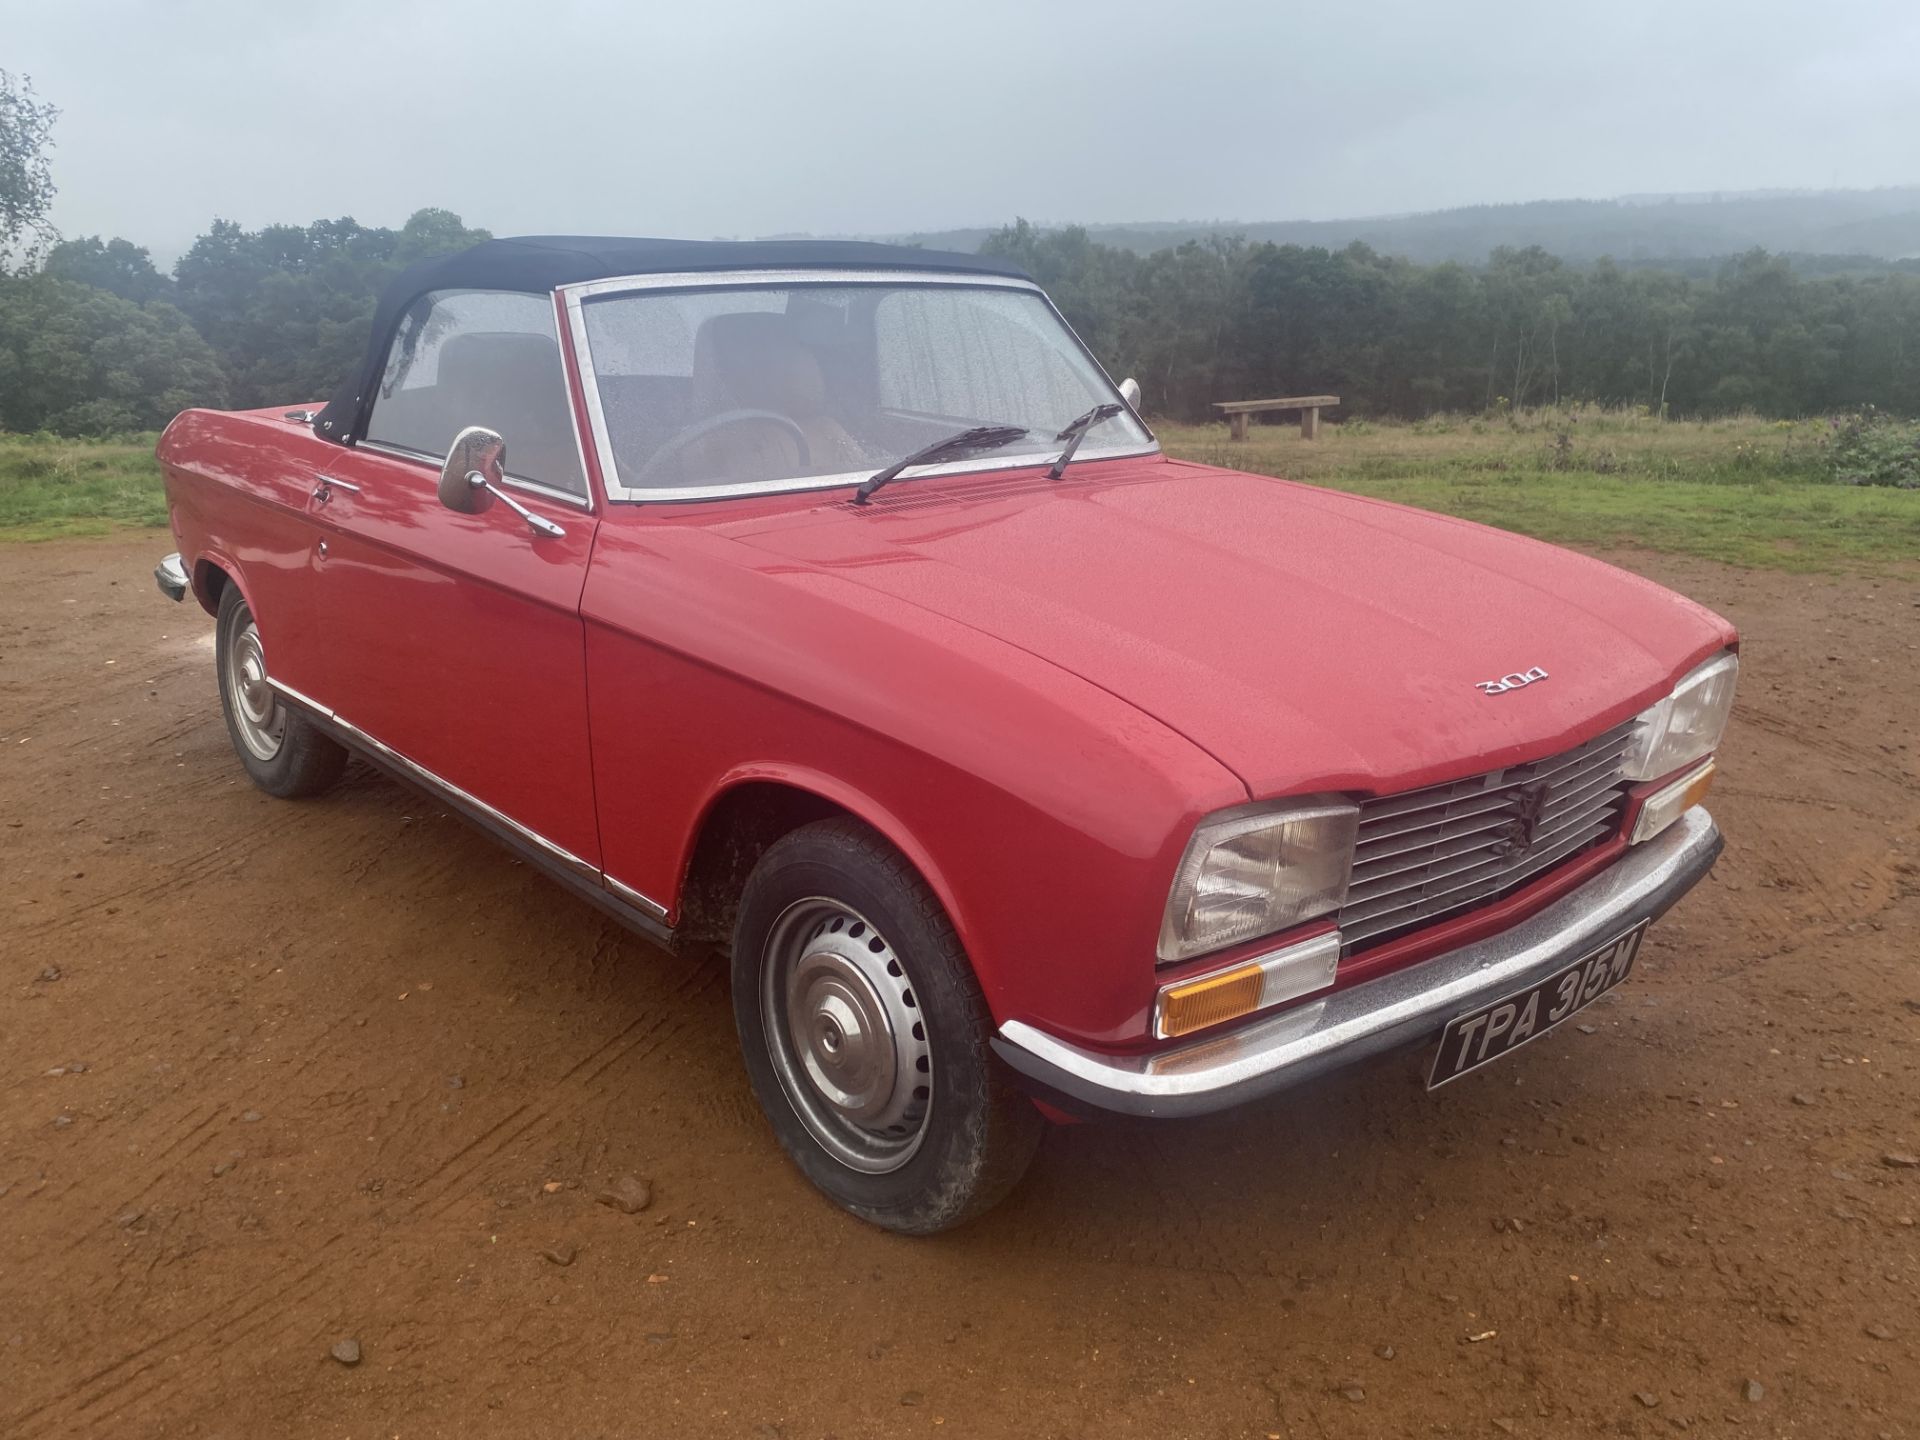 Peugeot 304 Convertible. Registration number: TPA 315M. Rare RHD drive model with 82,696 miles from - Image 9 of 14